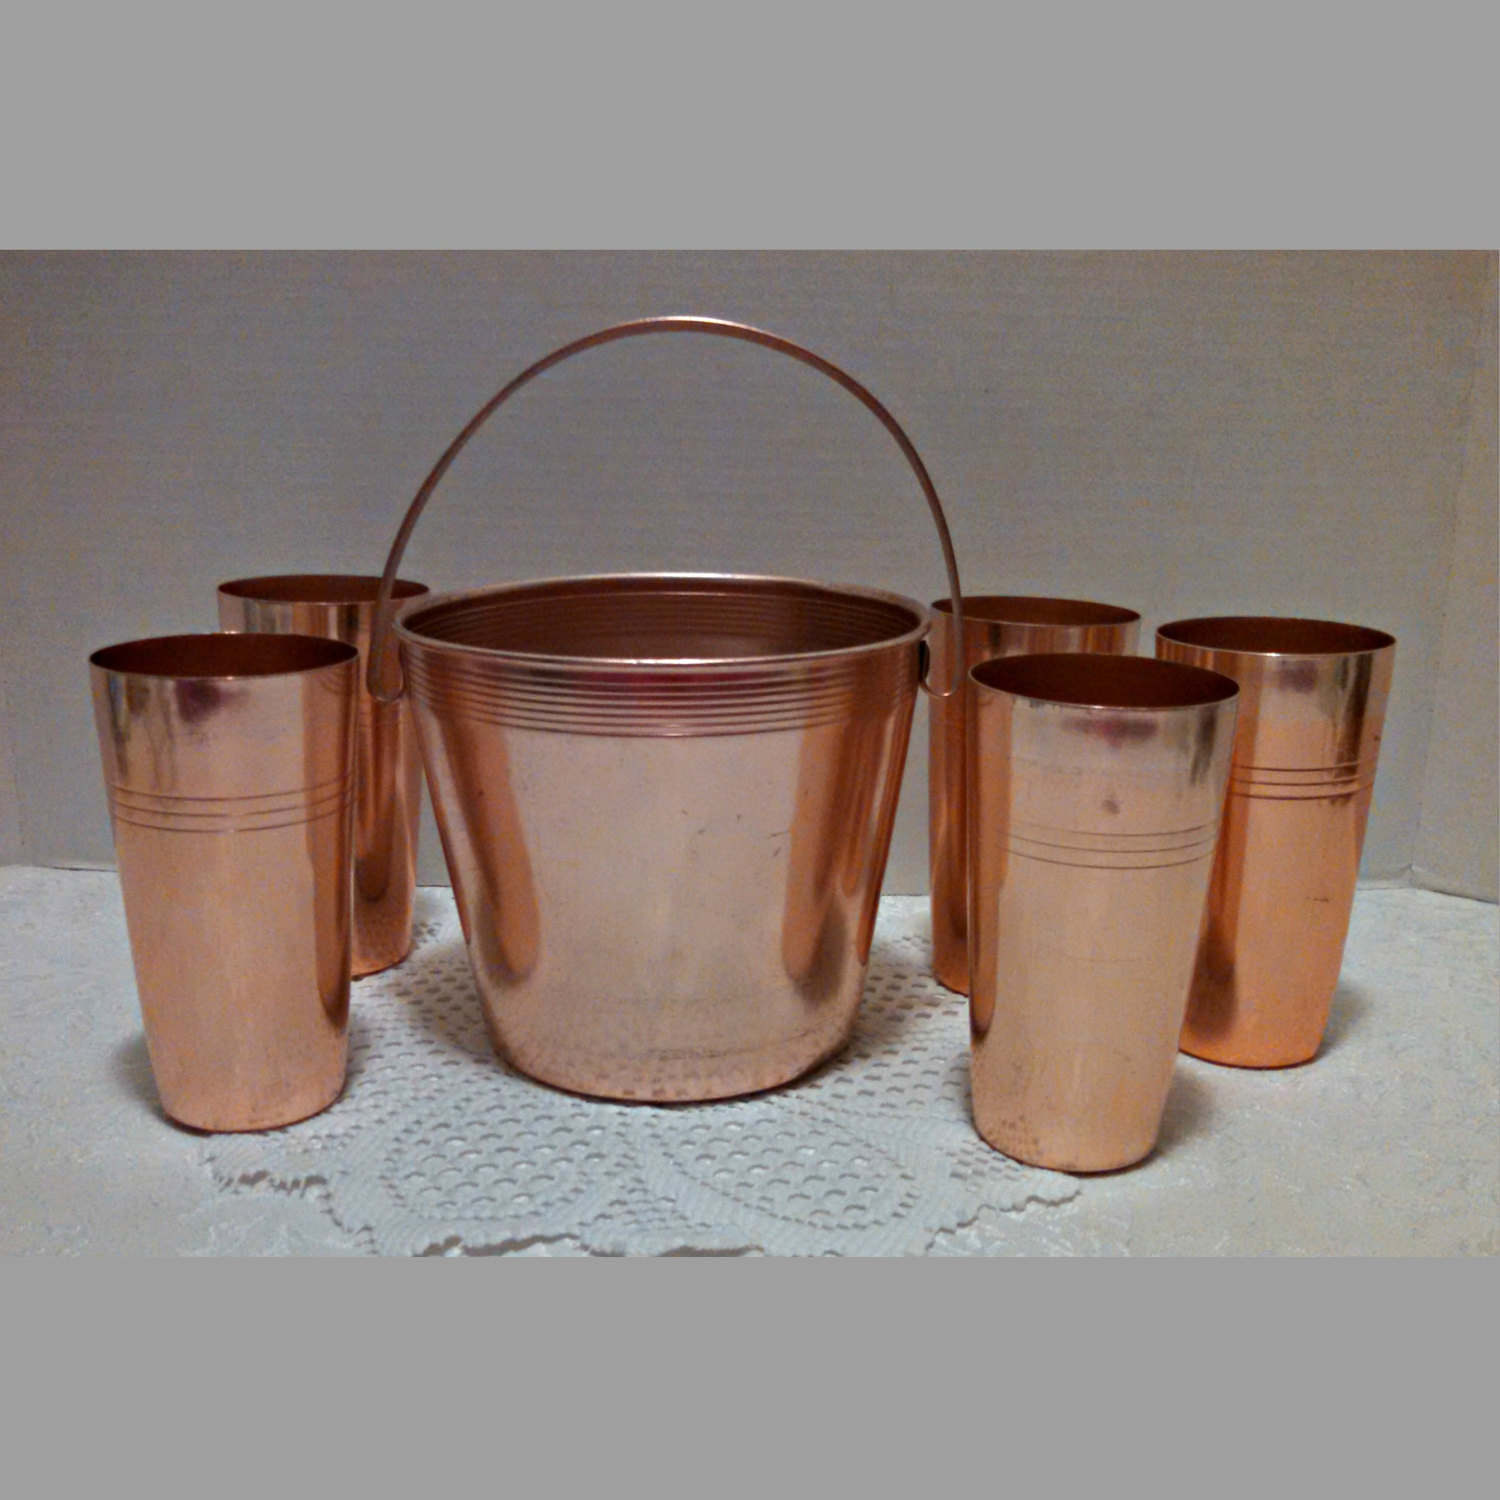 Vintage WEST BEND Multi Colored 8 Aluminum Cups Tumblers and Wood Pitcher  Retro